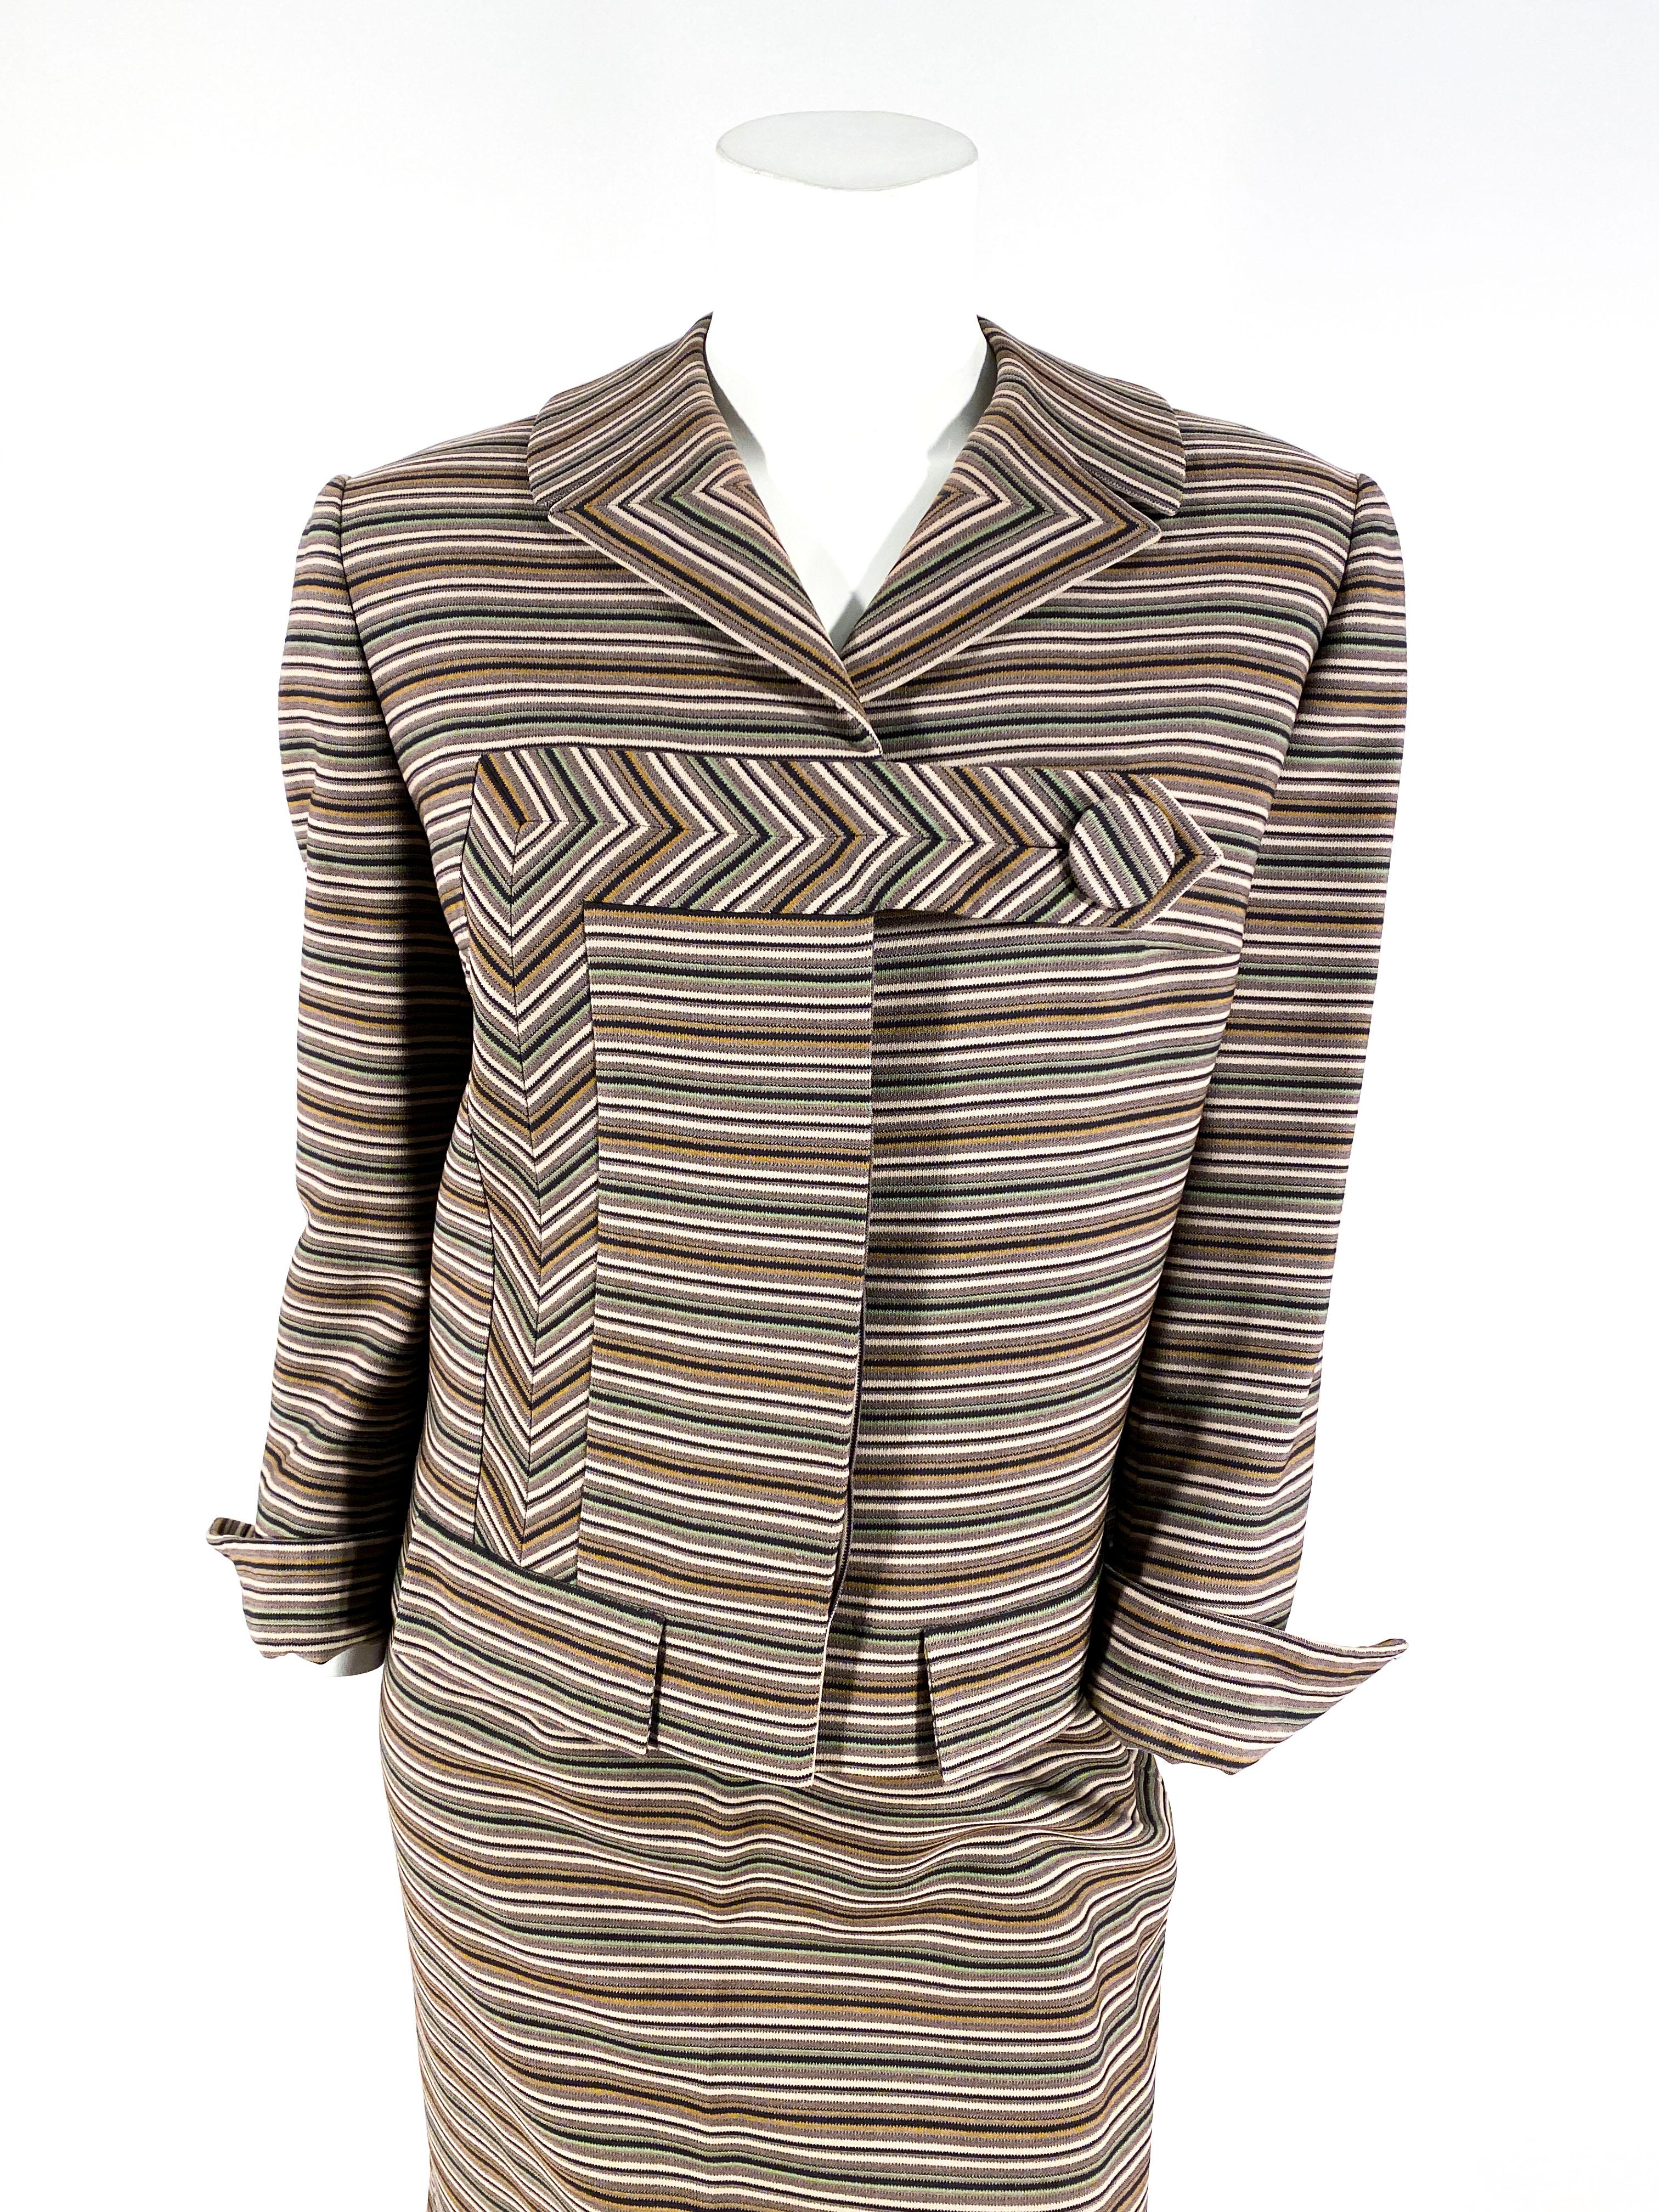 Late 1950s to early 1960s Irene suit made of a wool blend striped textile featuring tones of olive, sage, black, and taupe. The Jacket has inset and pattern-matched panels, decorative pocket coverings, and a large asymmetrical button closure. The